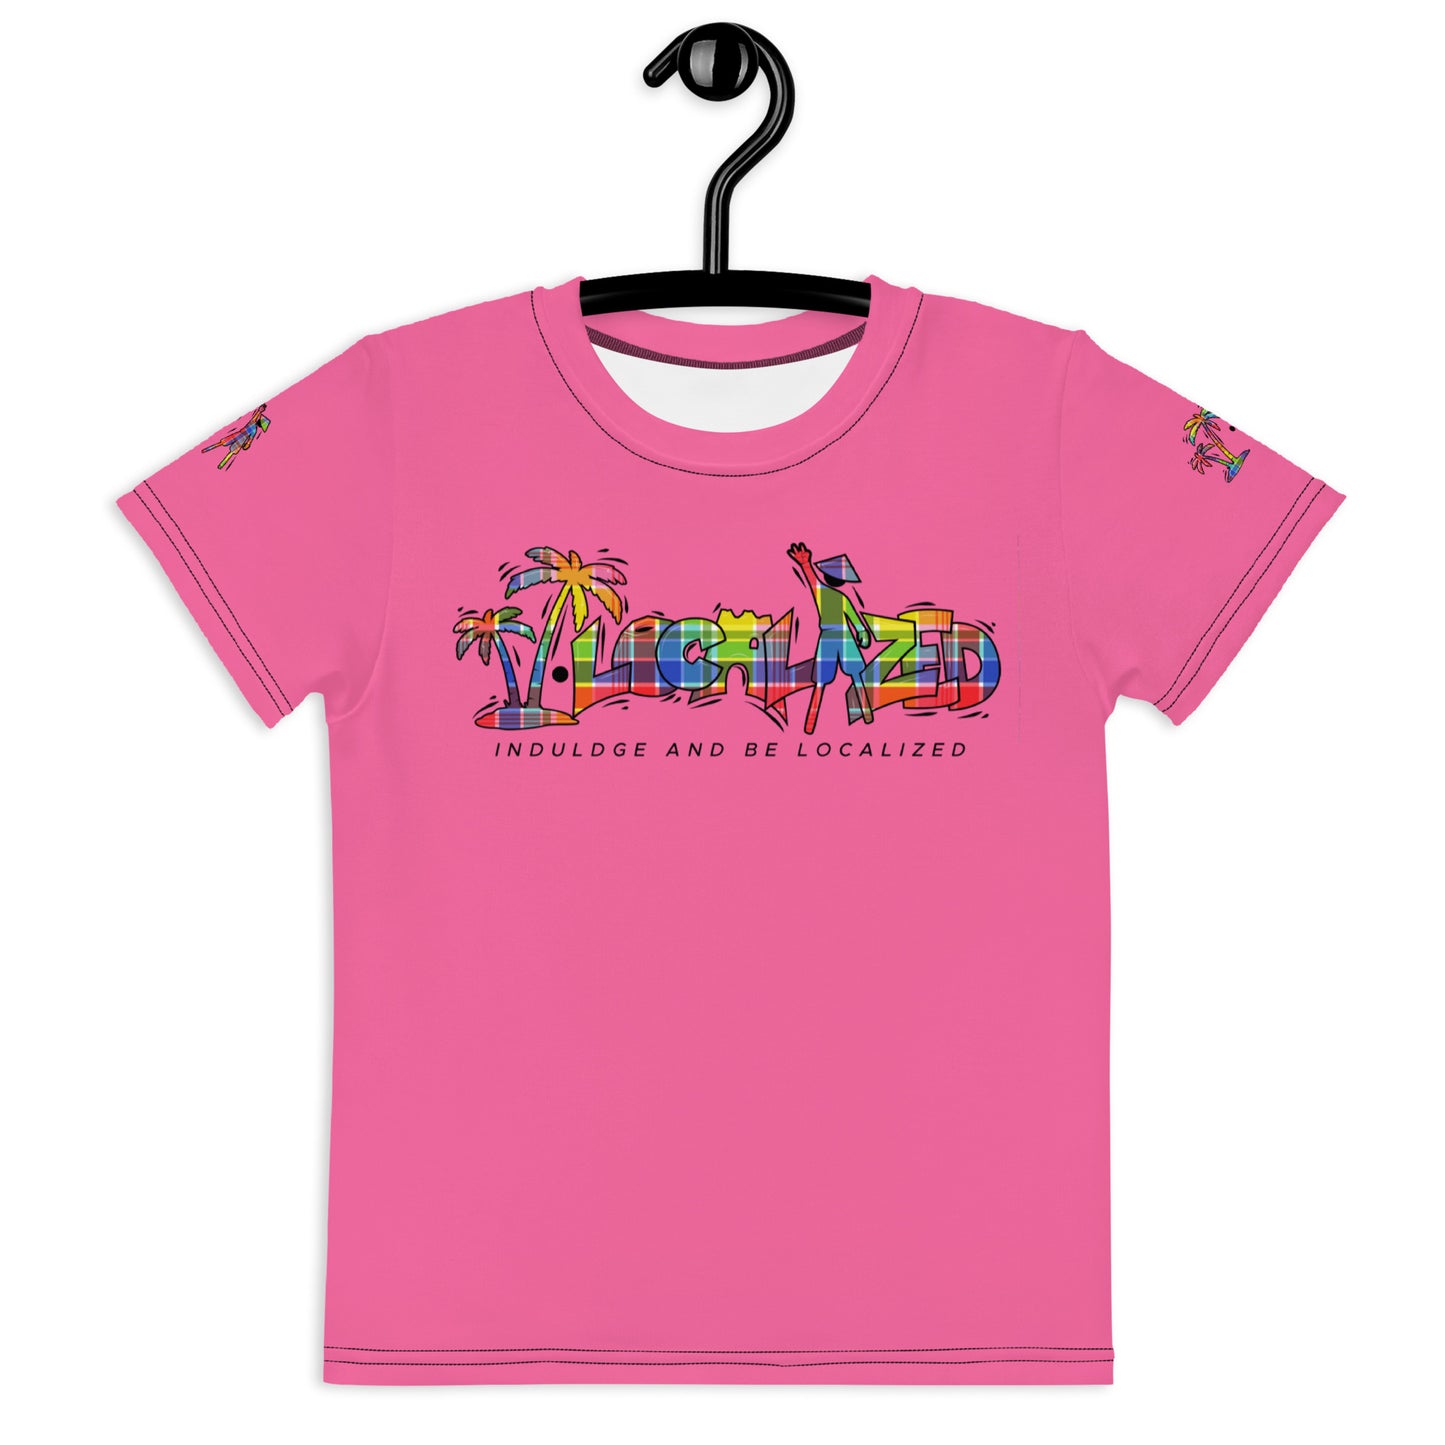 Pink V.Localized (Madras) Dry-Fit T-Shirt